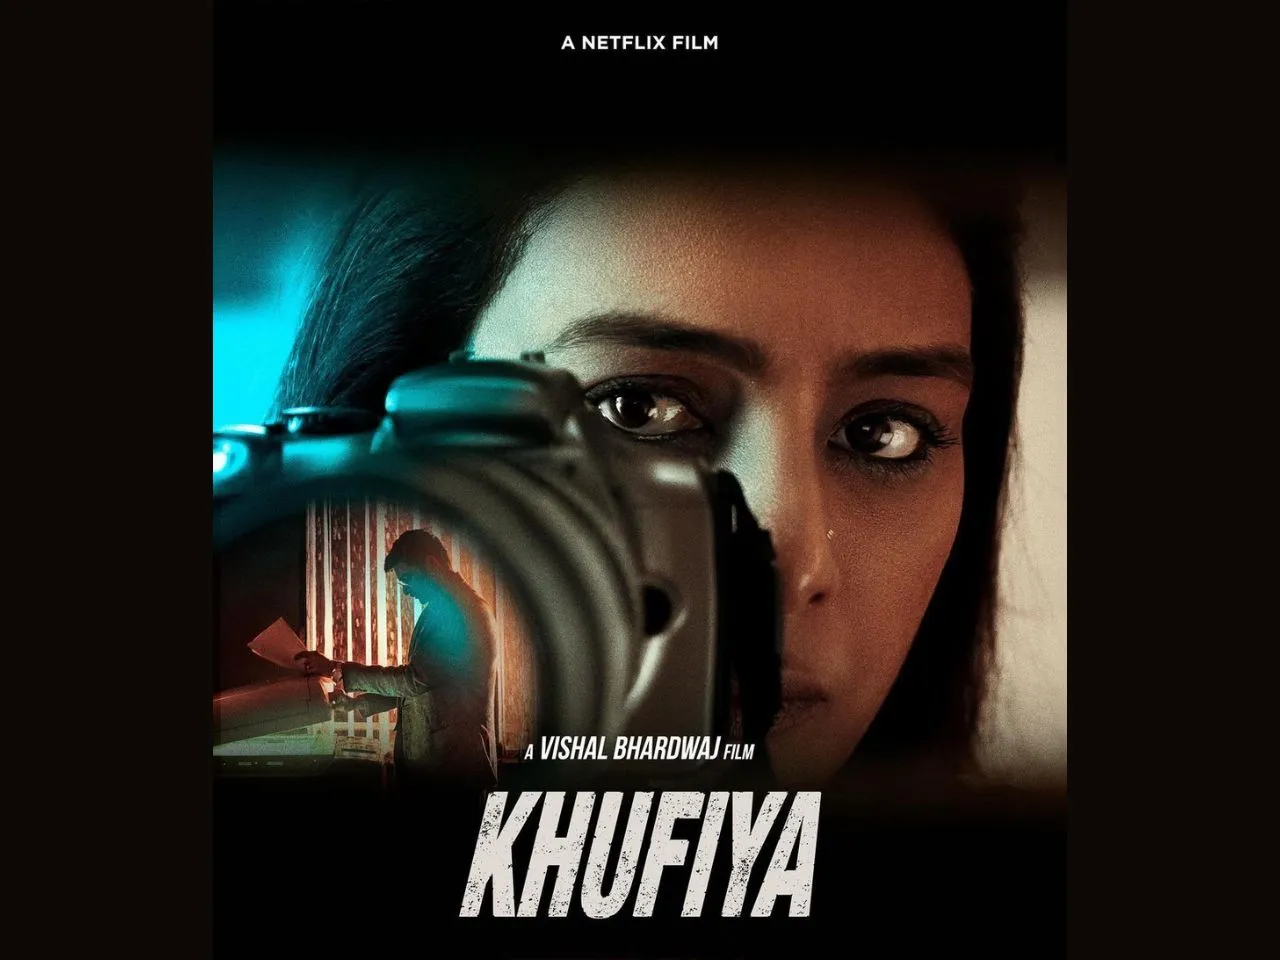 The Khufiya trailer shows an intriguing story about patriotism and some incredible acting